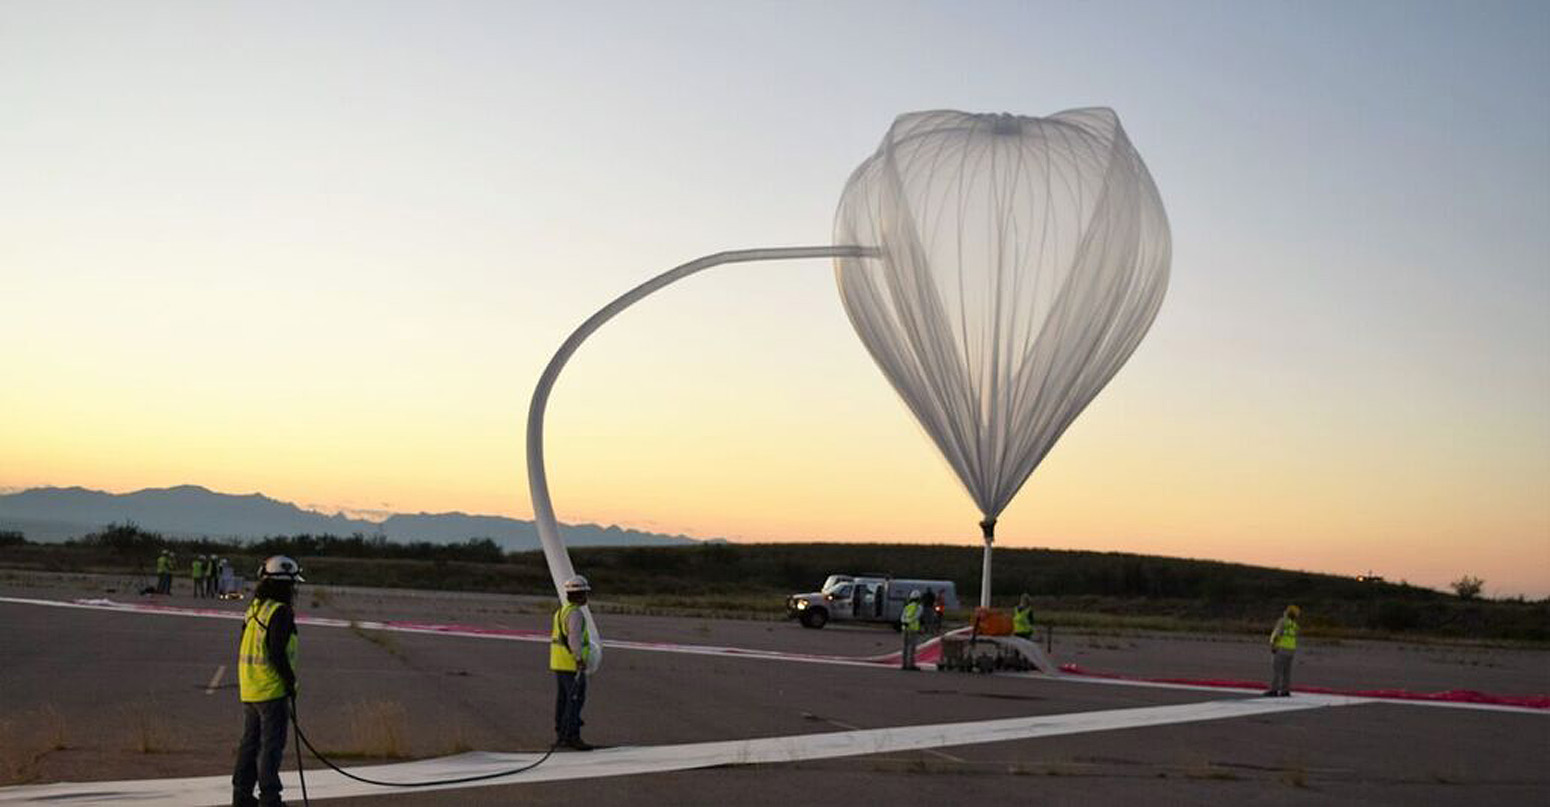 Preparing high-altitude balloon to carry solar observatory research payload into the stratosphere.